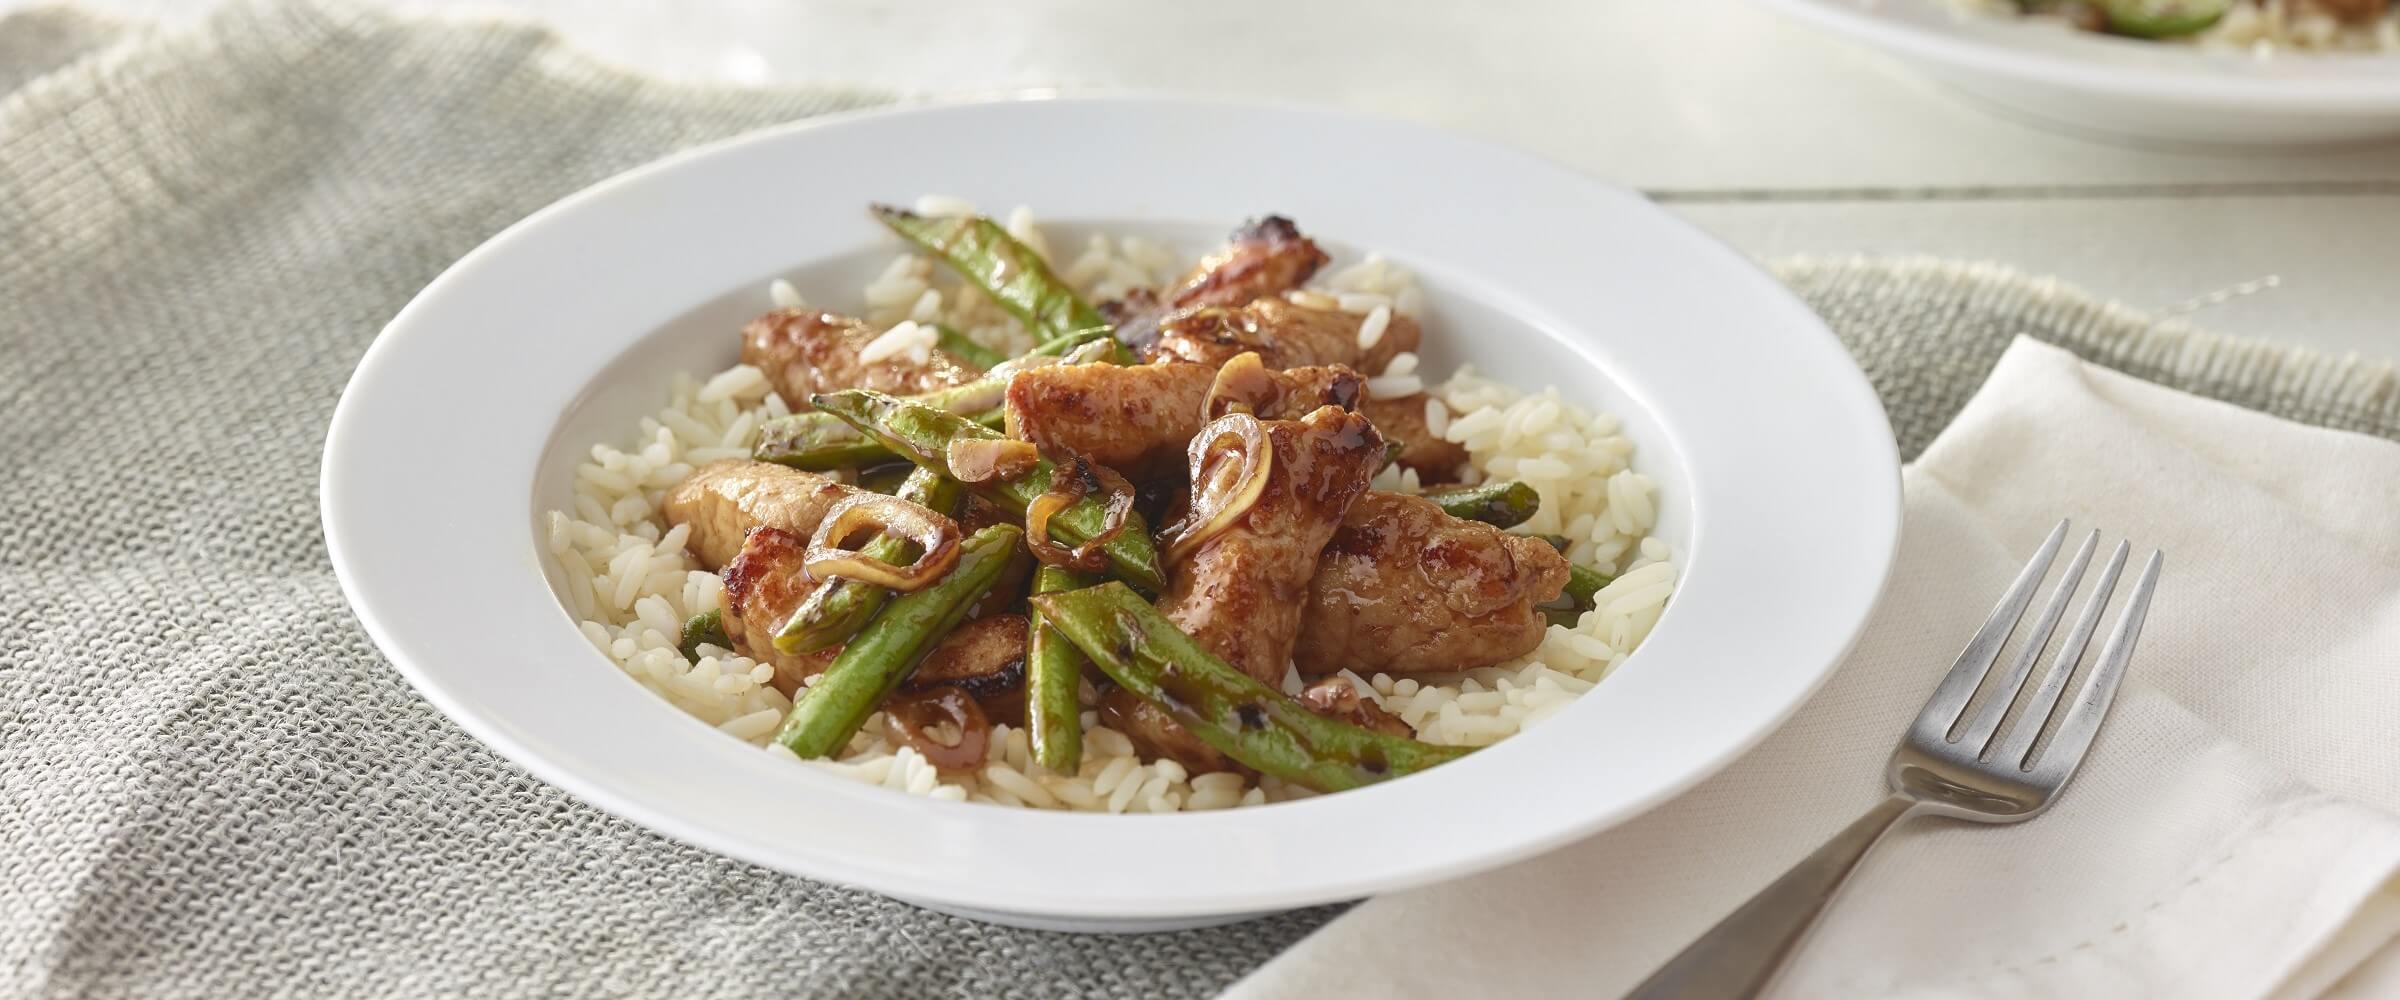 general tso’s pork and green beans over rice in white bowl